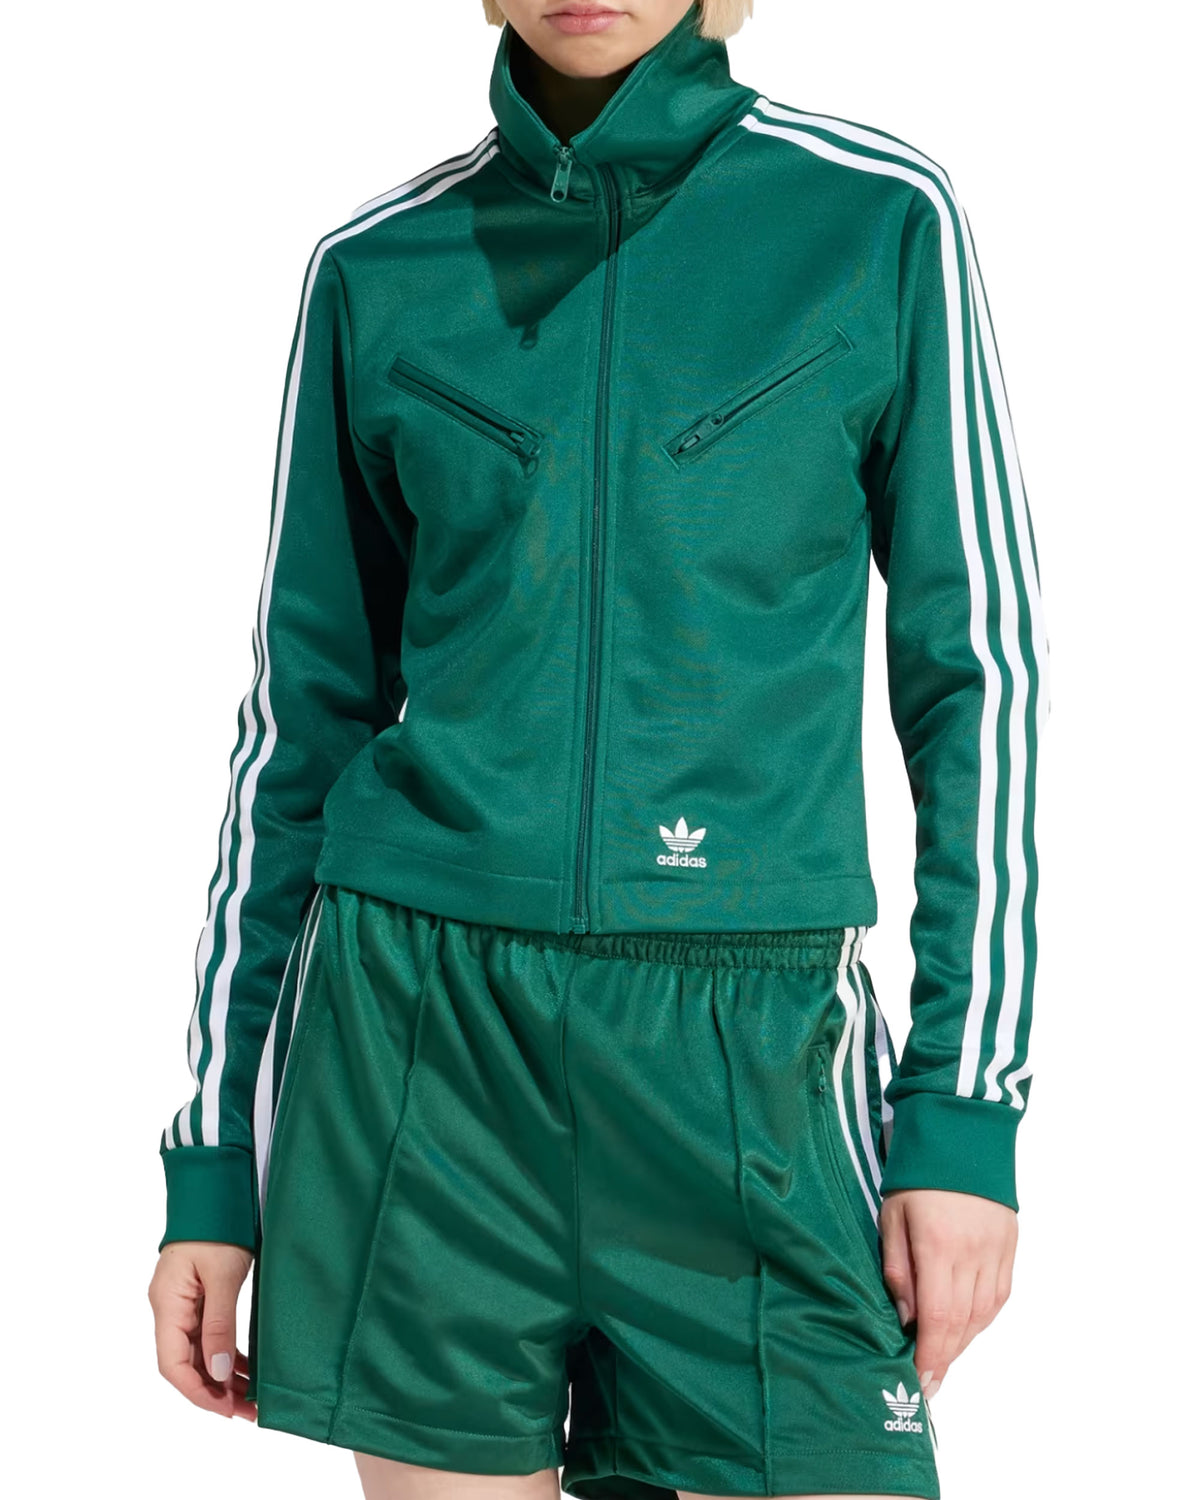 Woman's Adidas Montreal Track Top Green